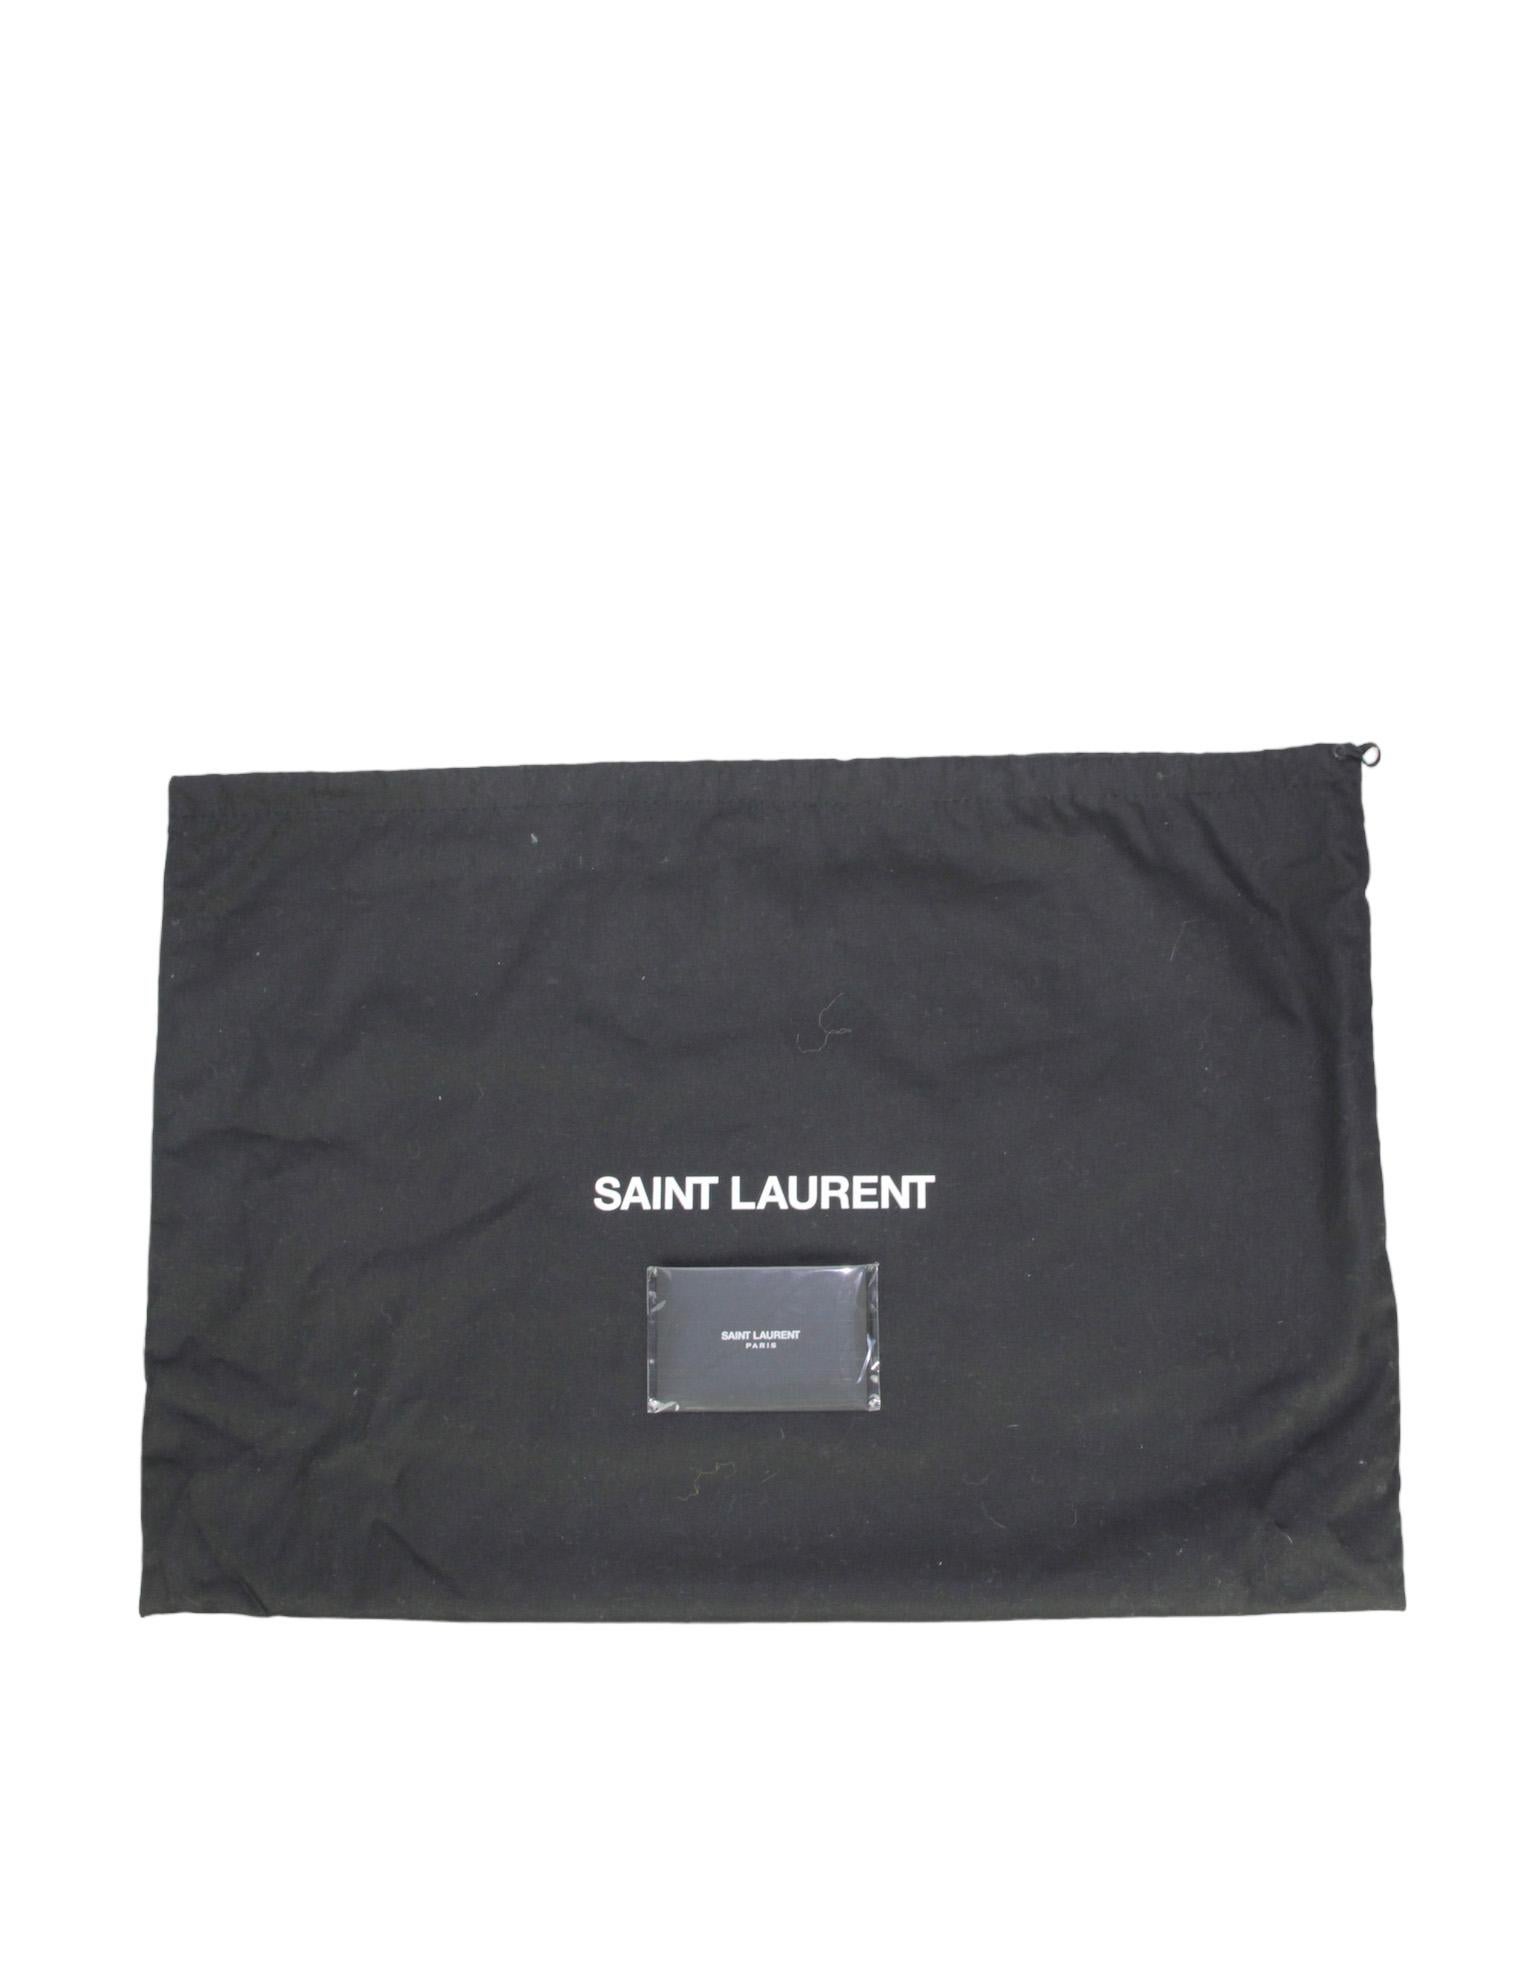 Saint Laurent NEW So Black Leather Small Loulou Puffer Bag rt. $3300 For Sale 7